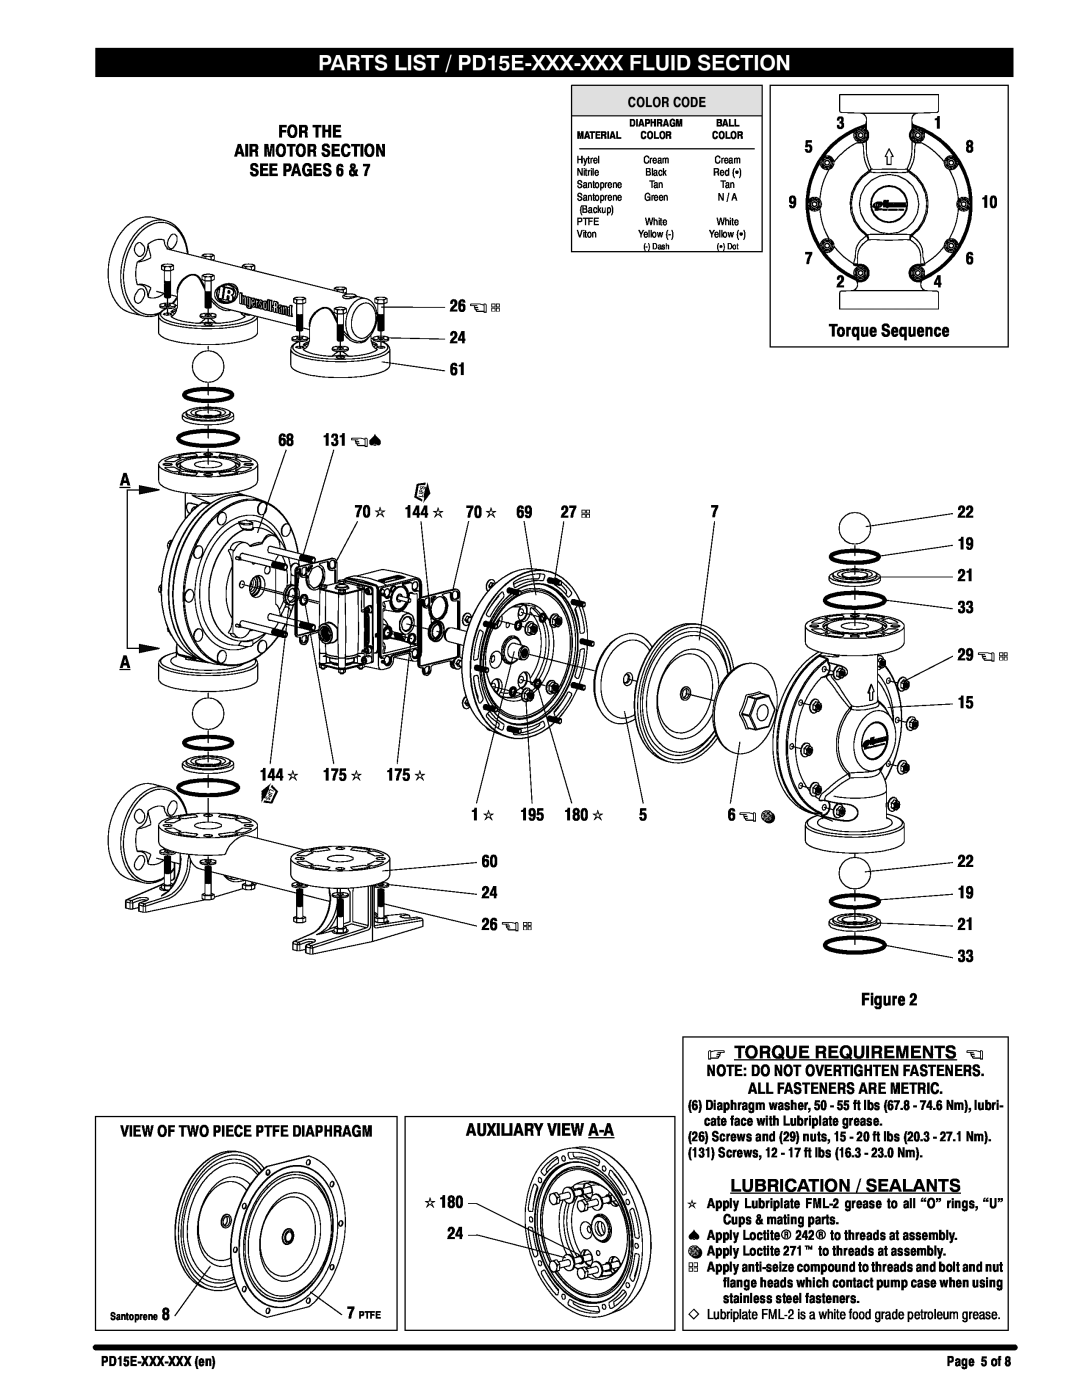 Ingersoll-Rand PD15E-FES-PXX manual PARTS LIST / PD15E-XXX-XXXFLUID SECTION, For The Air Motor Section See Pages 